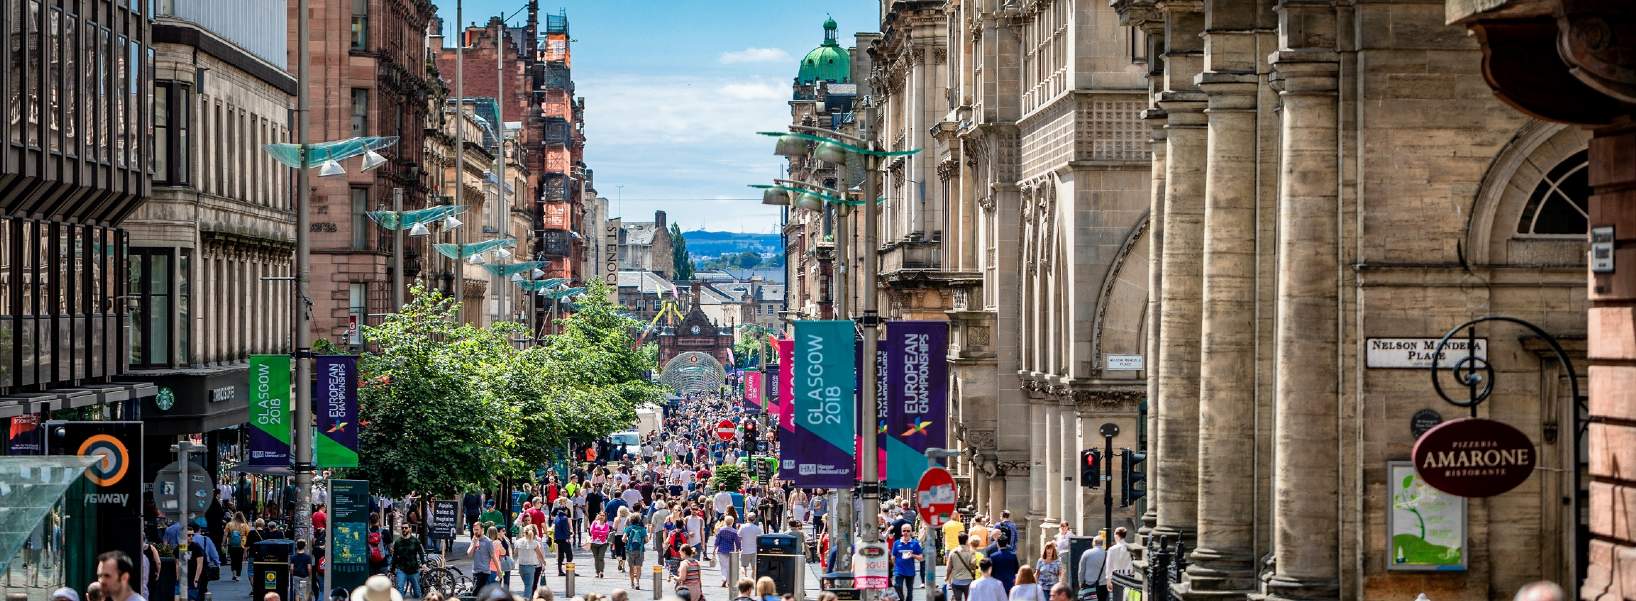 What are the ingredients to innovate Glasgow’s real estate?